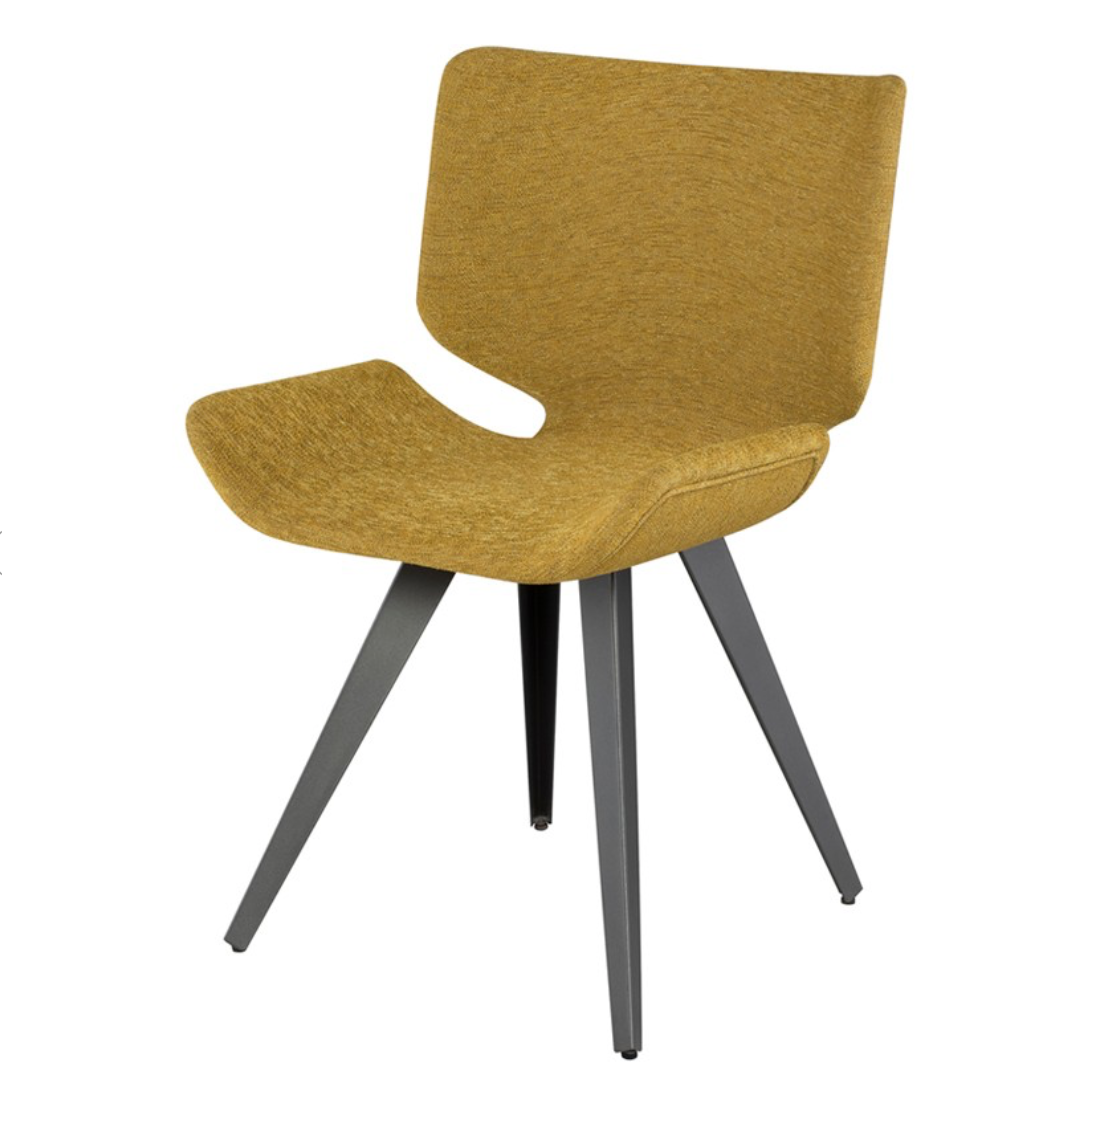 Astra Palm Springs Dining Chair